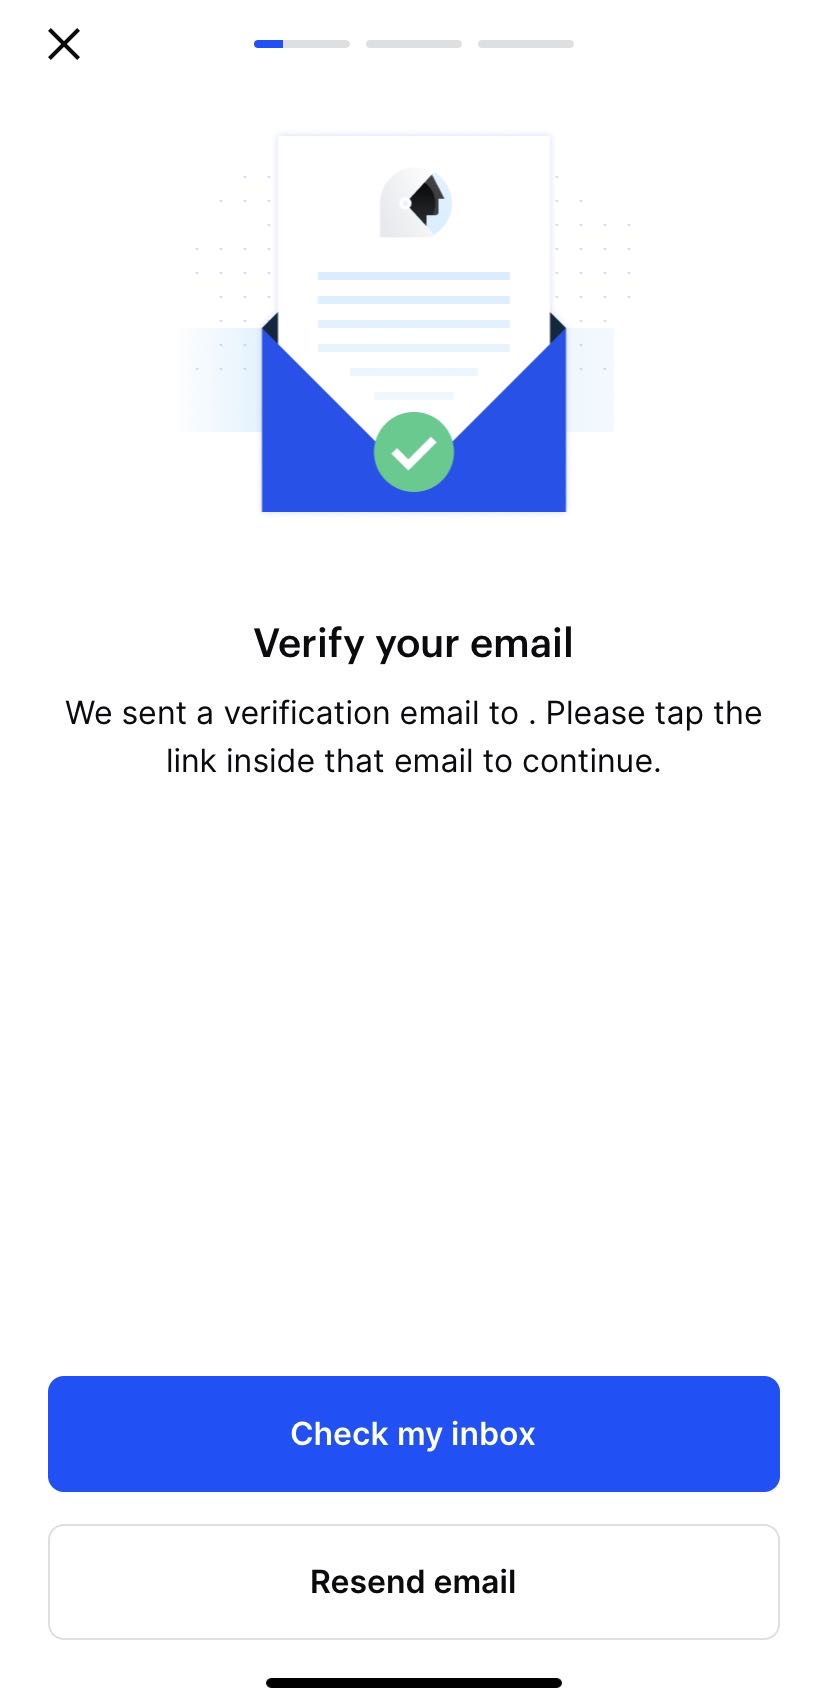 How Long Does It Take Coinbase to Verify Your ID ()?